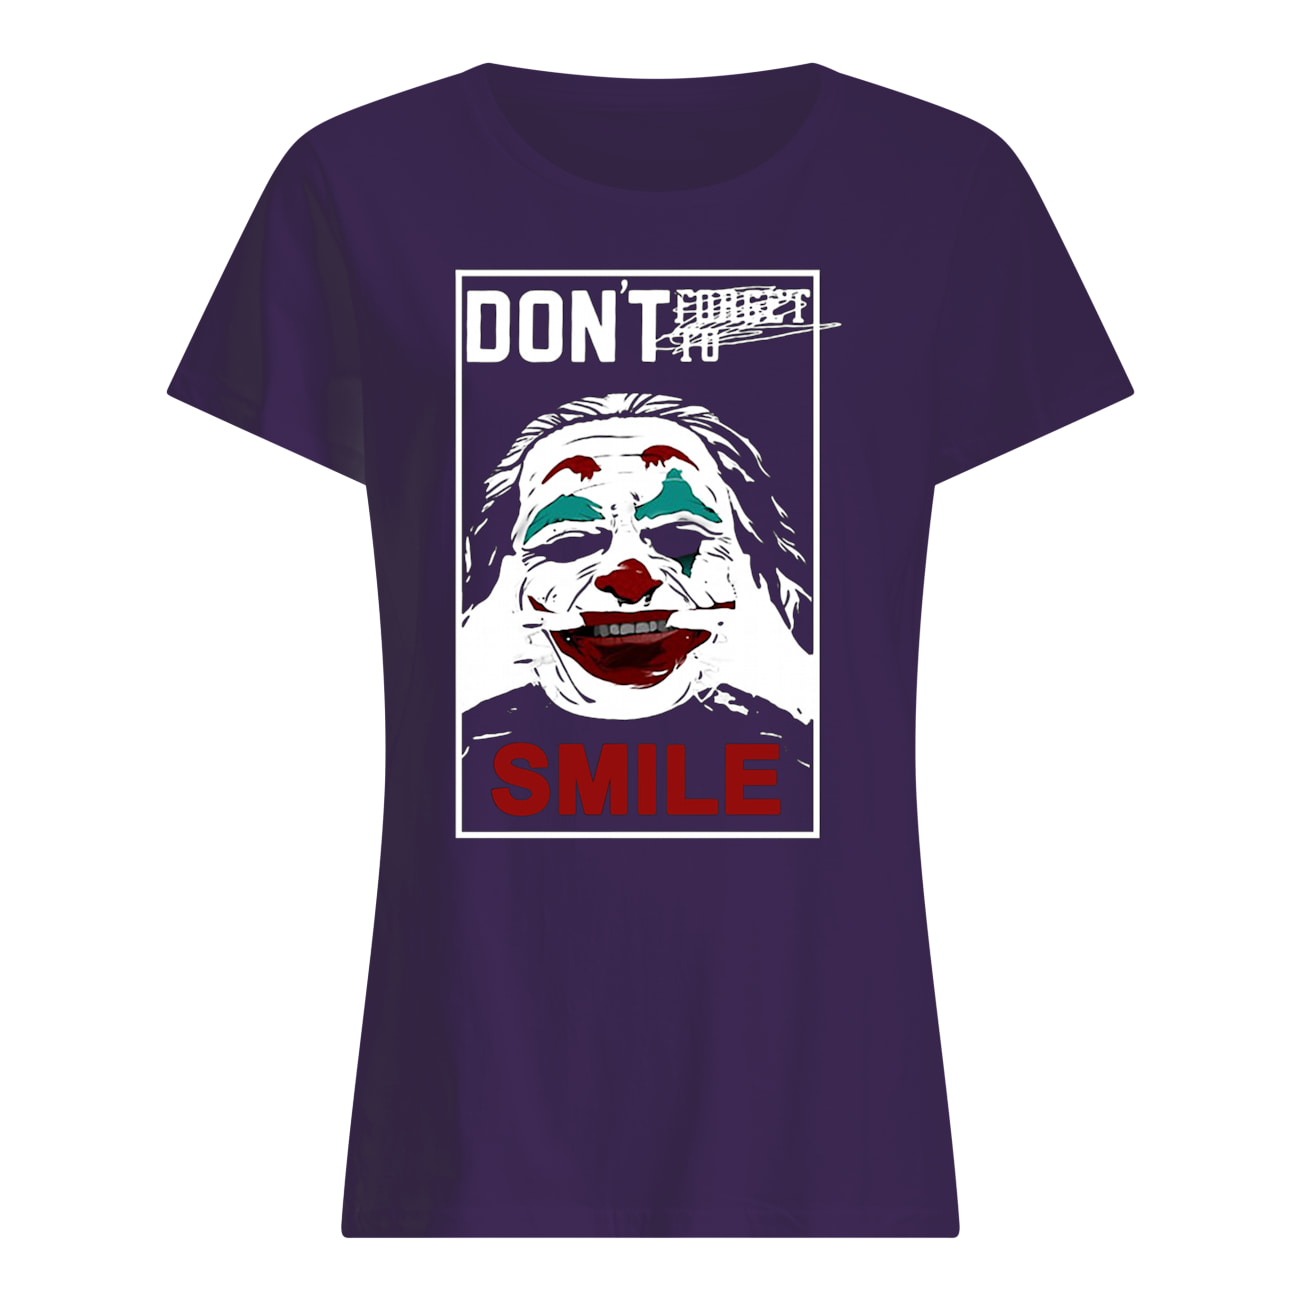 Joker don’t forget to smile womens shirt